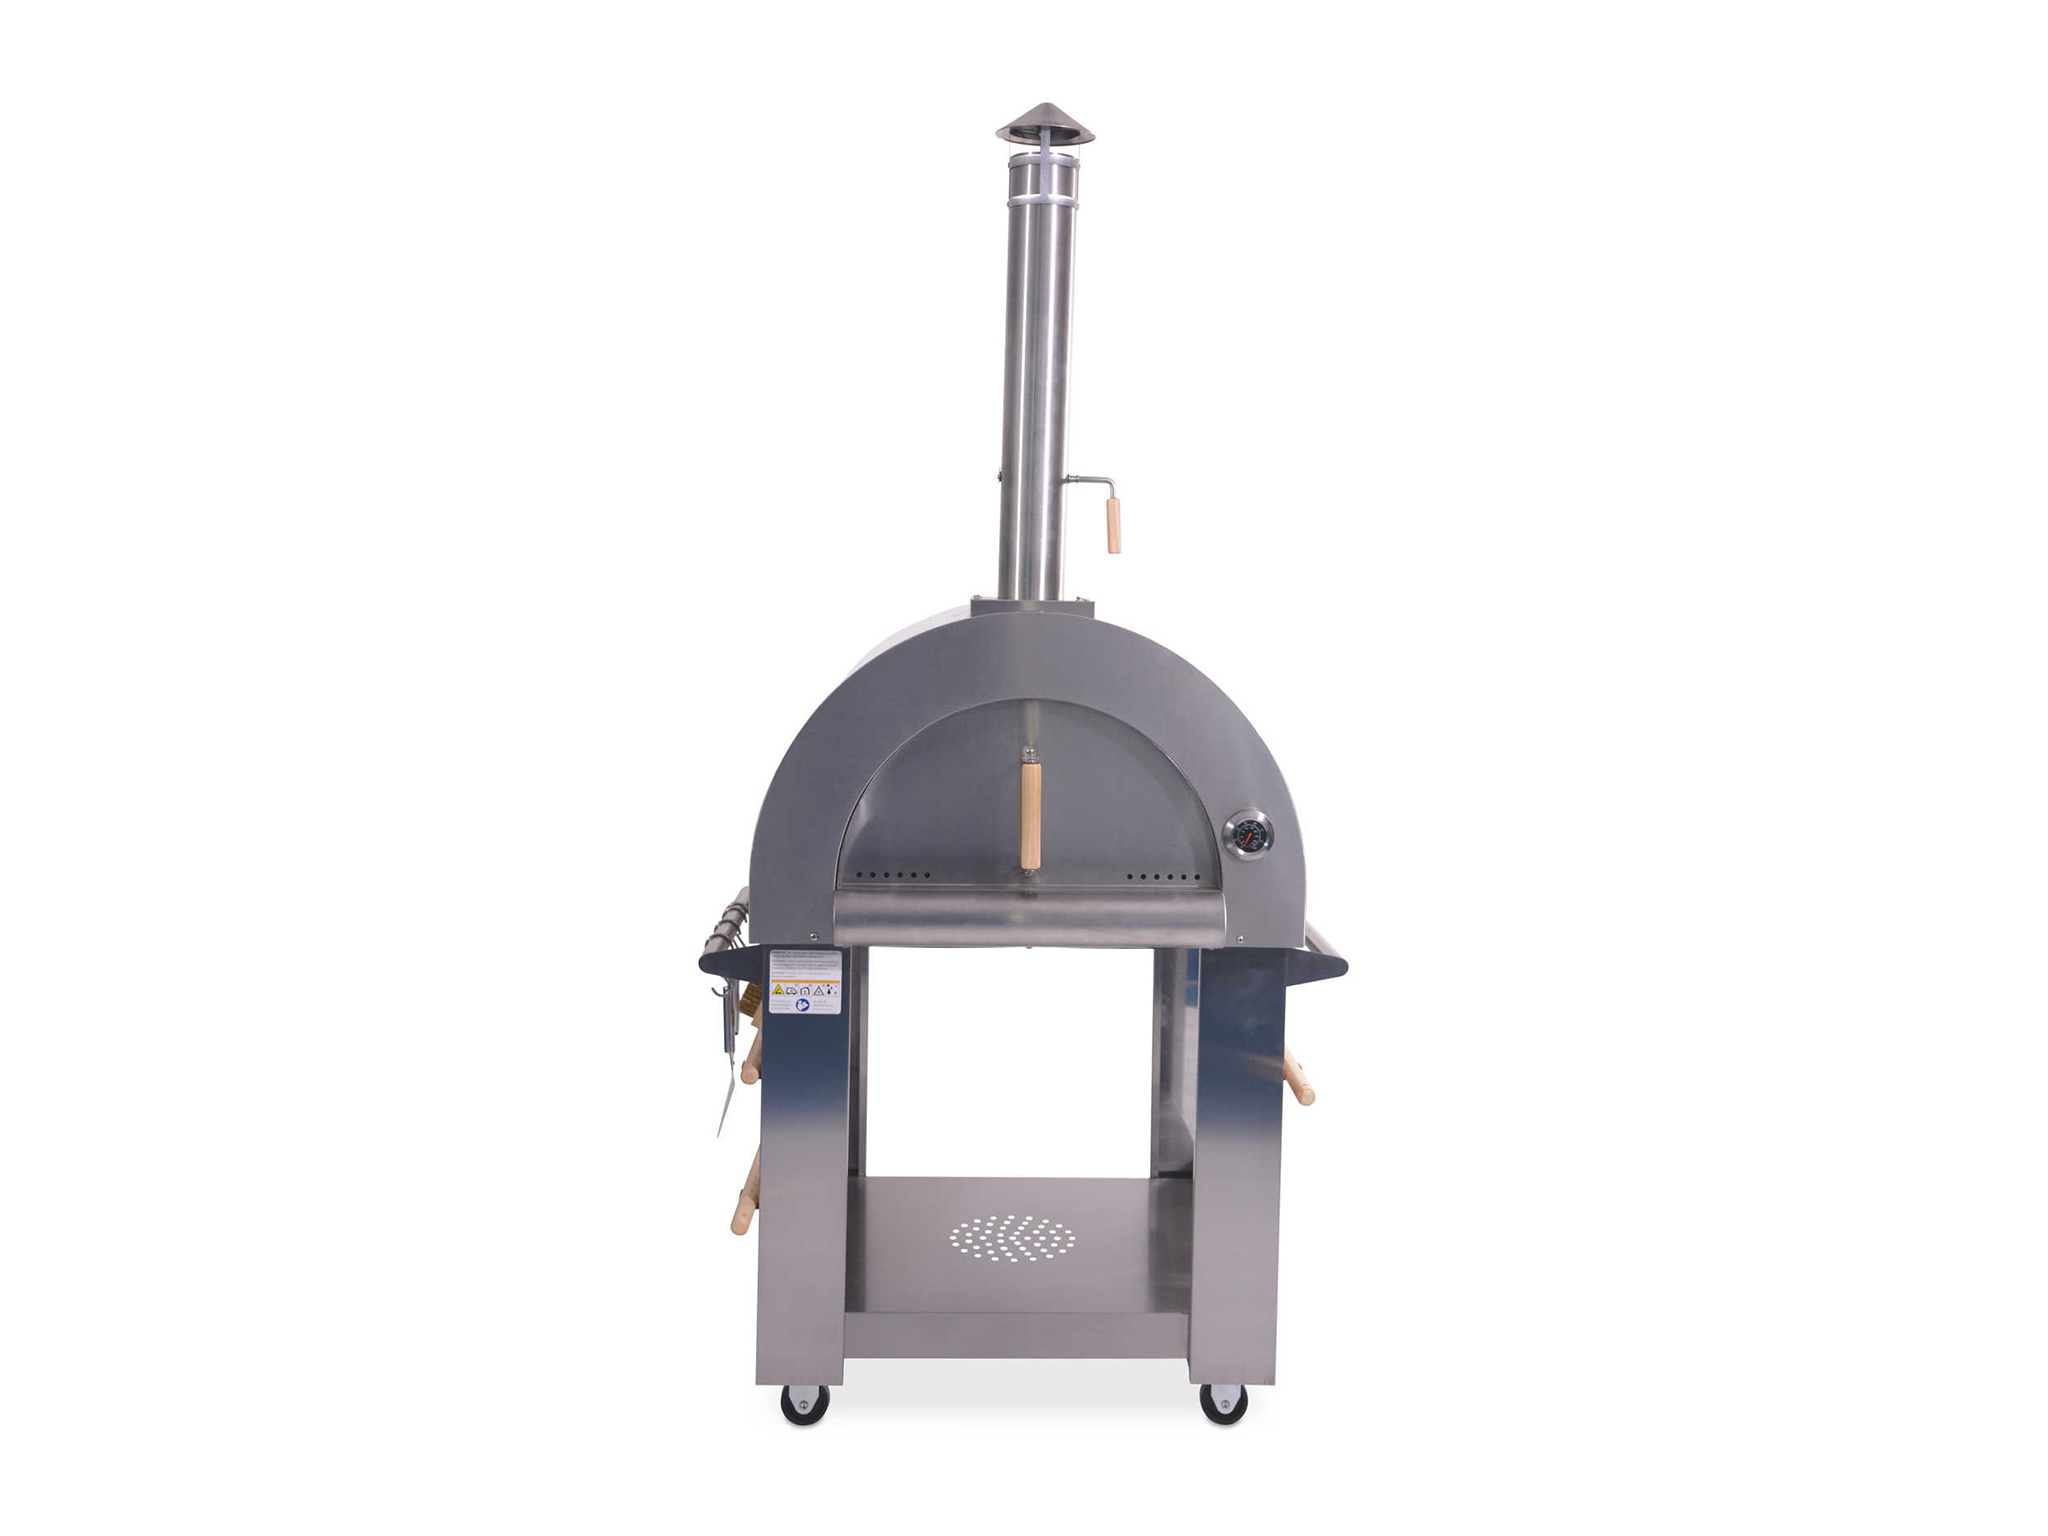 https://static.independent.co.uk/2022/05/10/10/Fire%20king%20large%20pizza%20oven-%20599.99%2C%20Aldi.co.uk%C2%A0.png